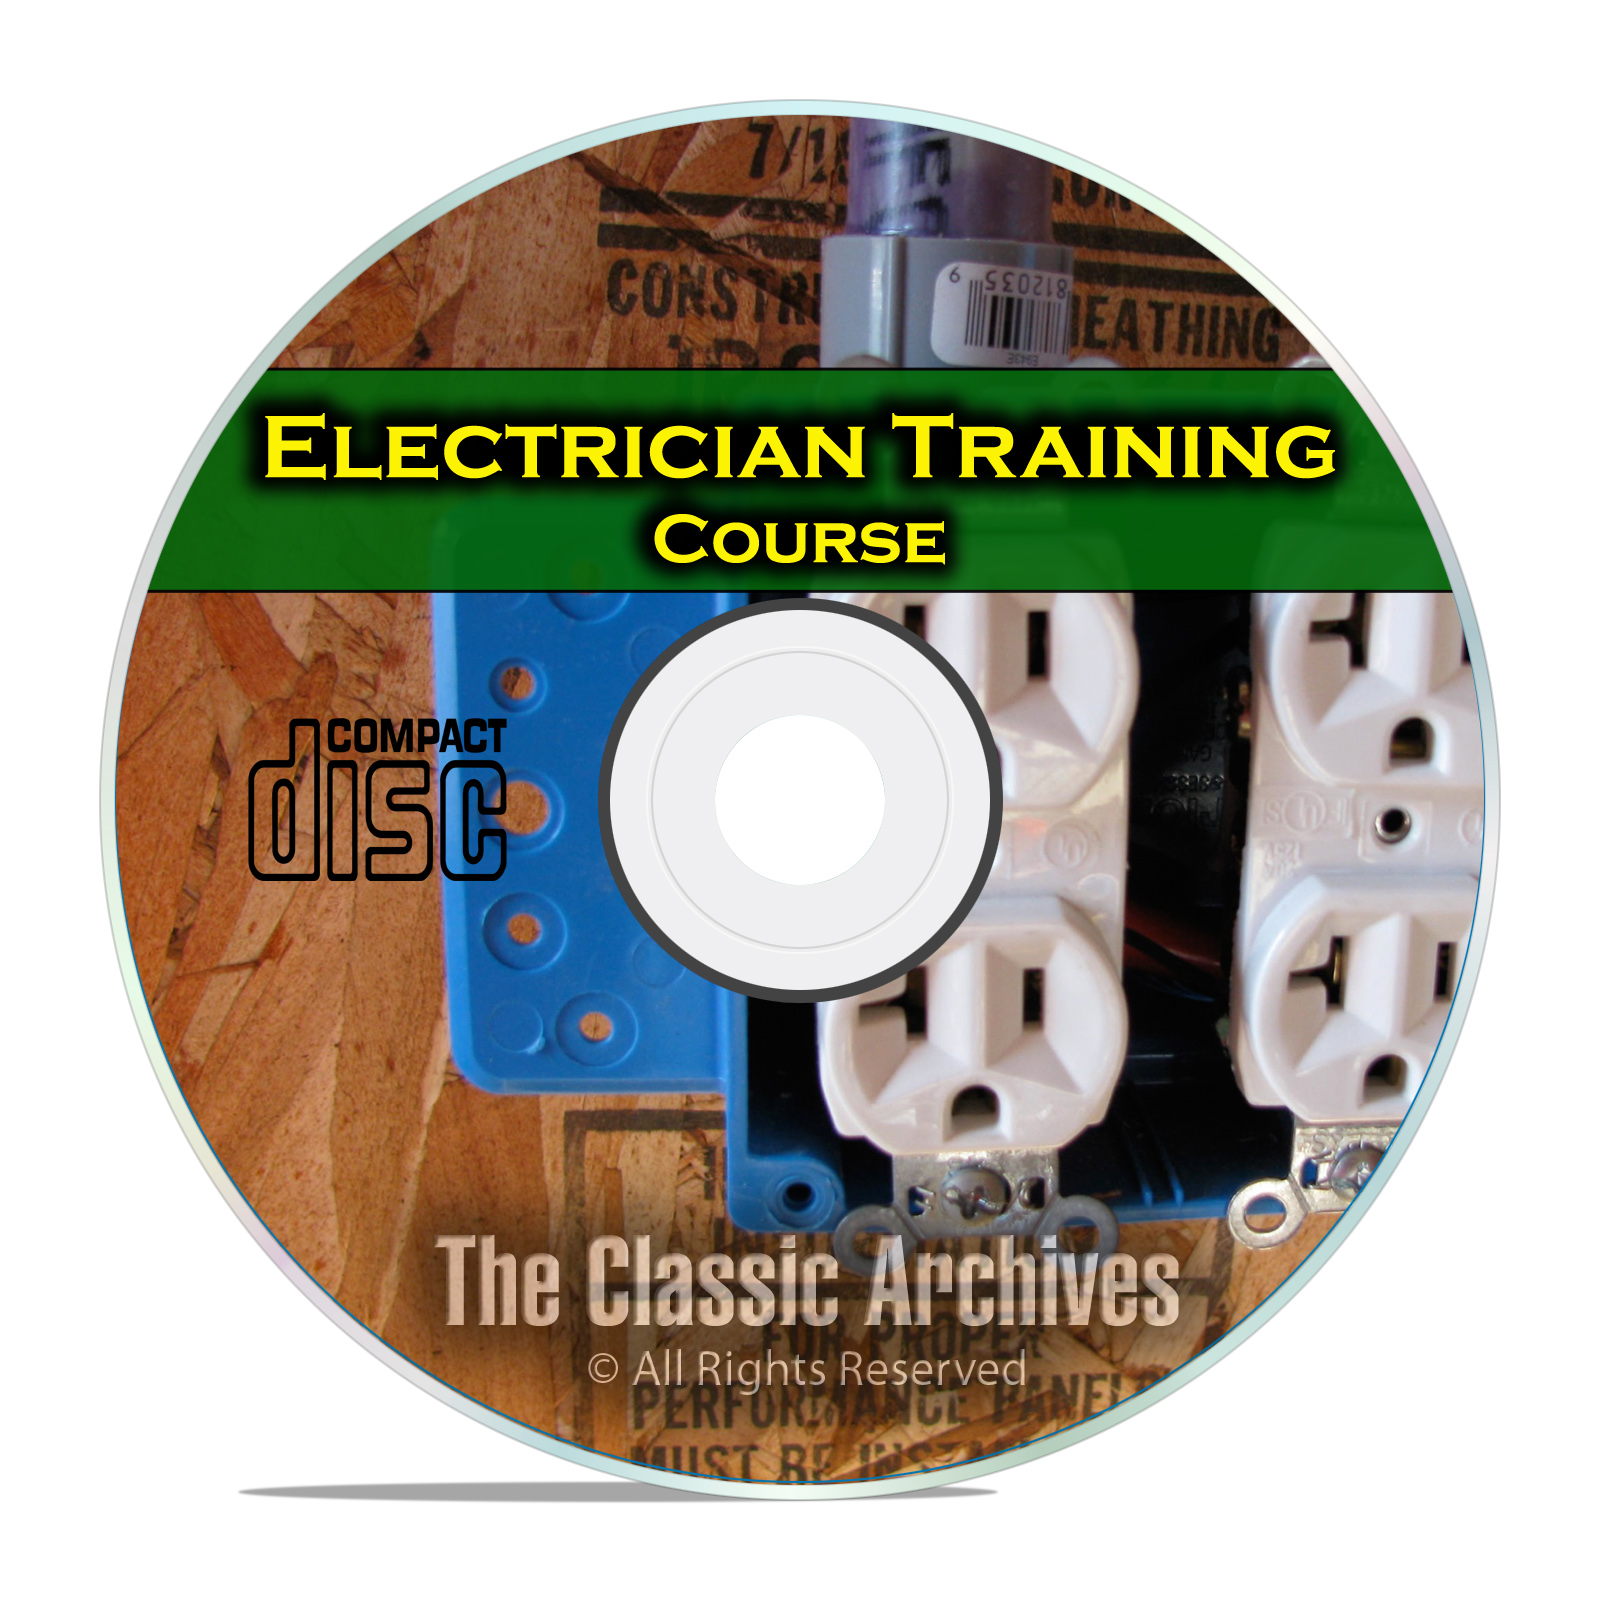 Electrician Journeyman Training Course Class, Electrical How To Manual CD